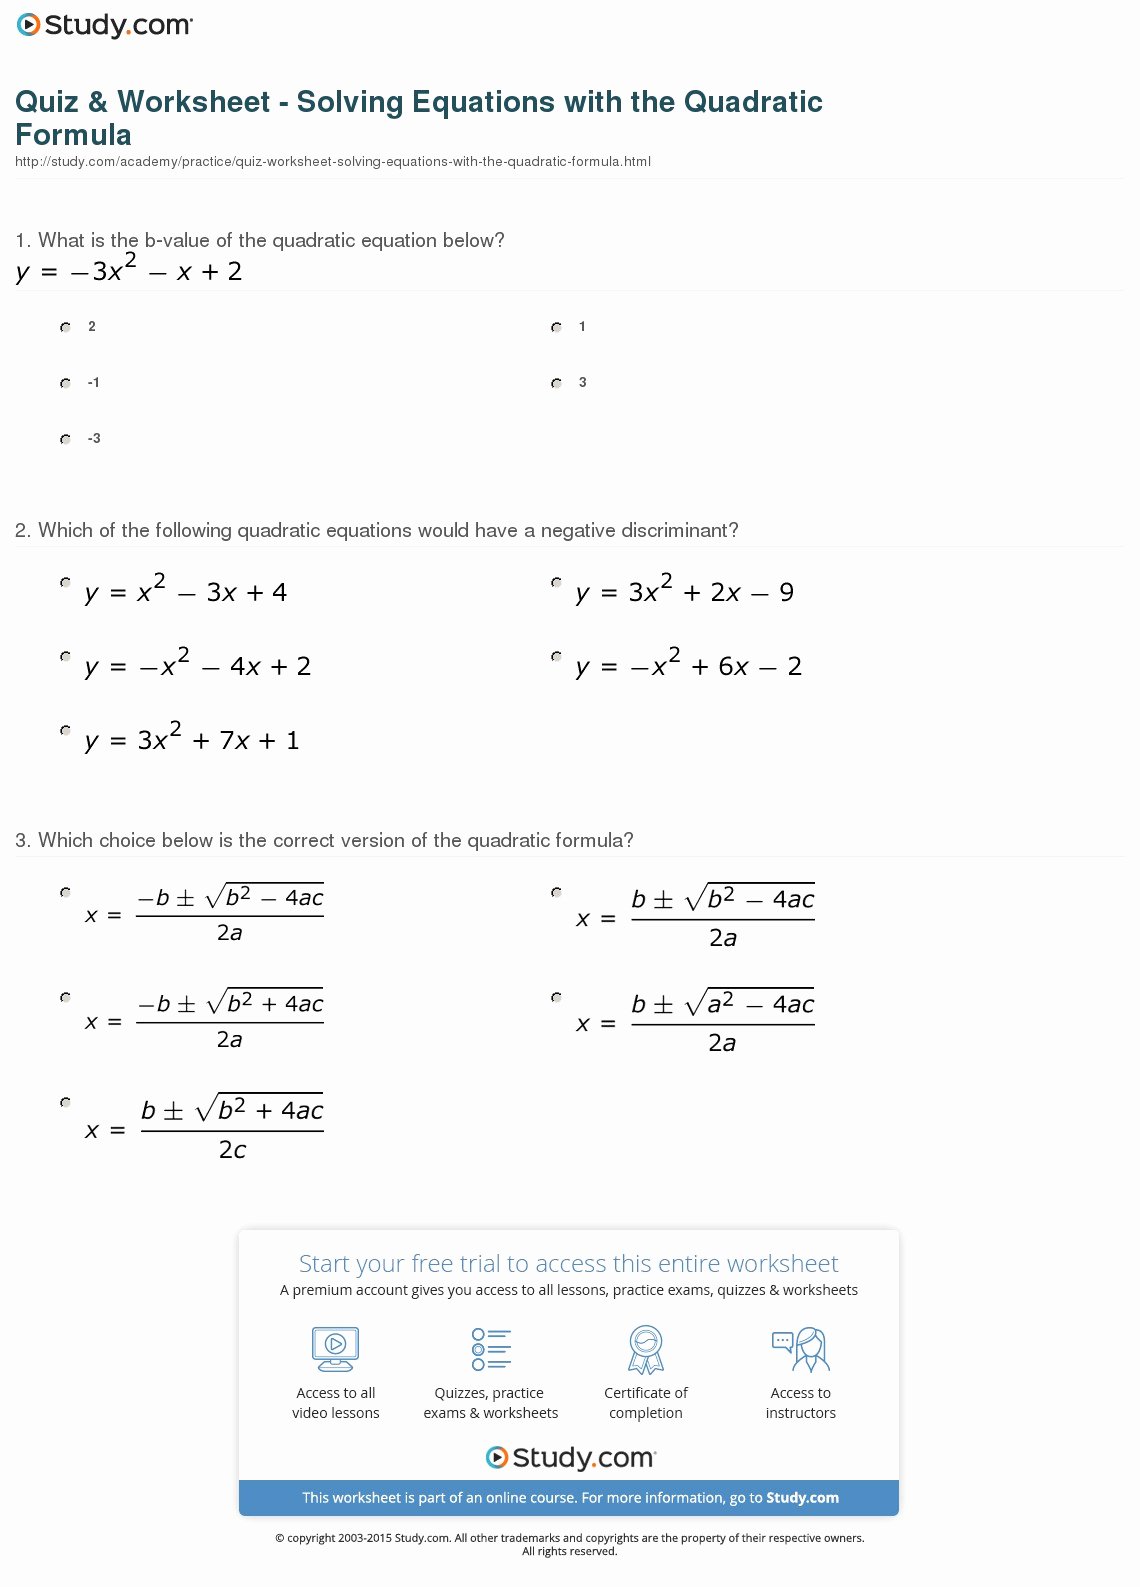 Quadratic formula Worksheet with Answers Awesome Quiz &amp; Worksheet solving Equations with the Quadratic